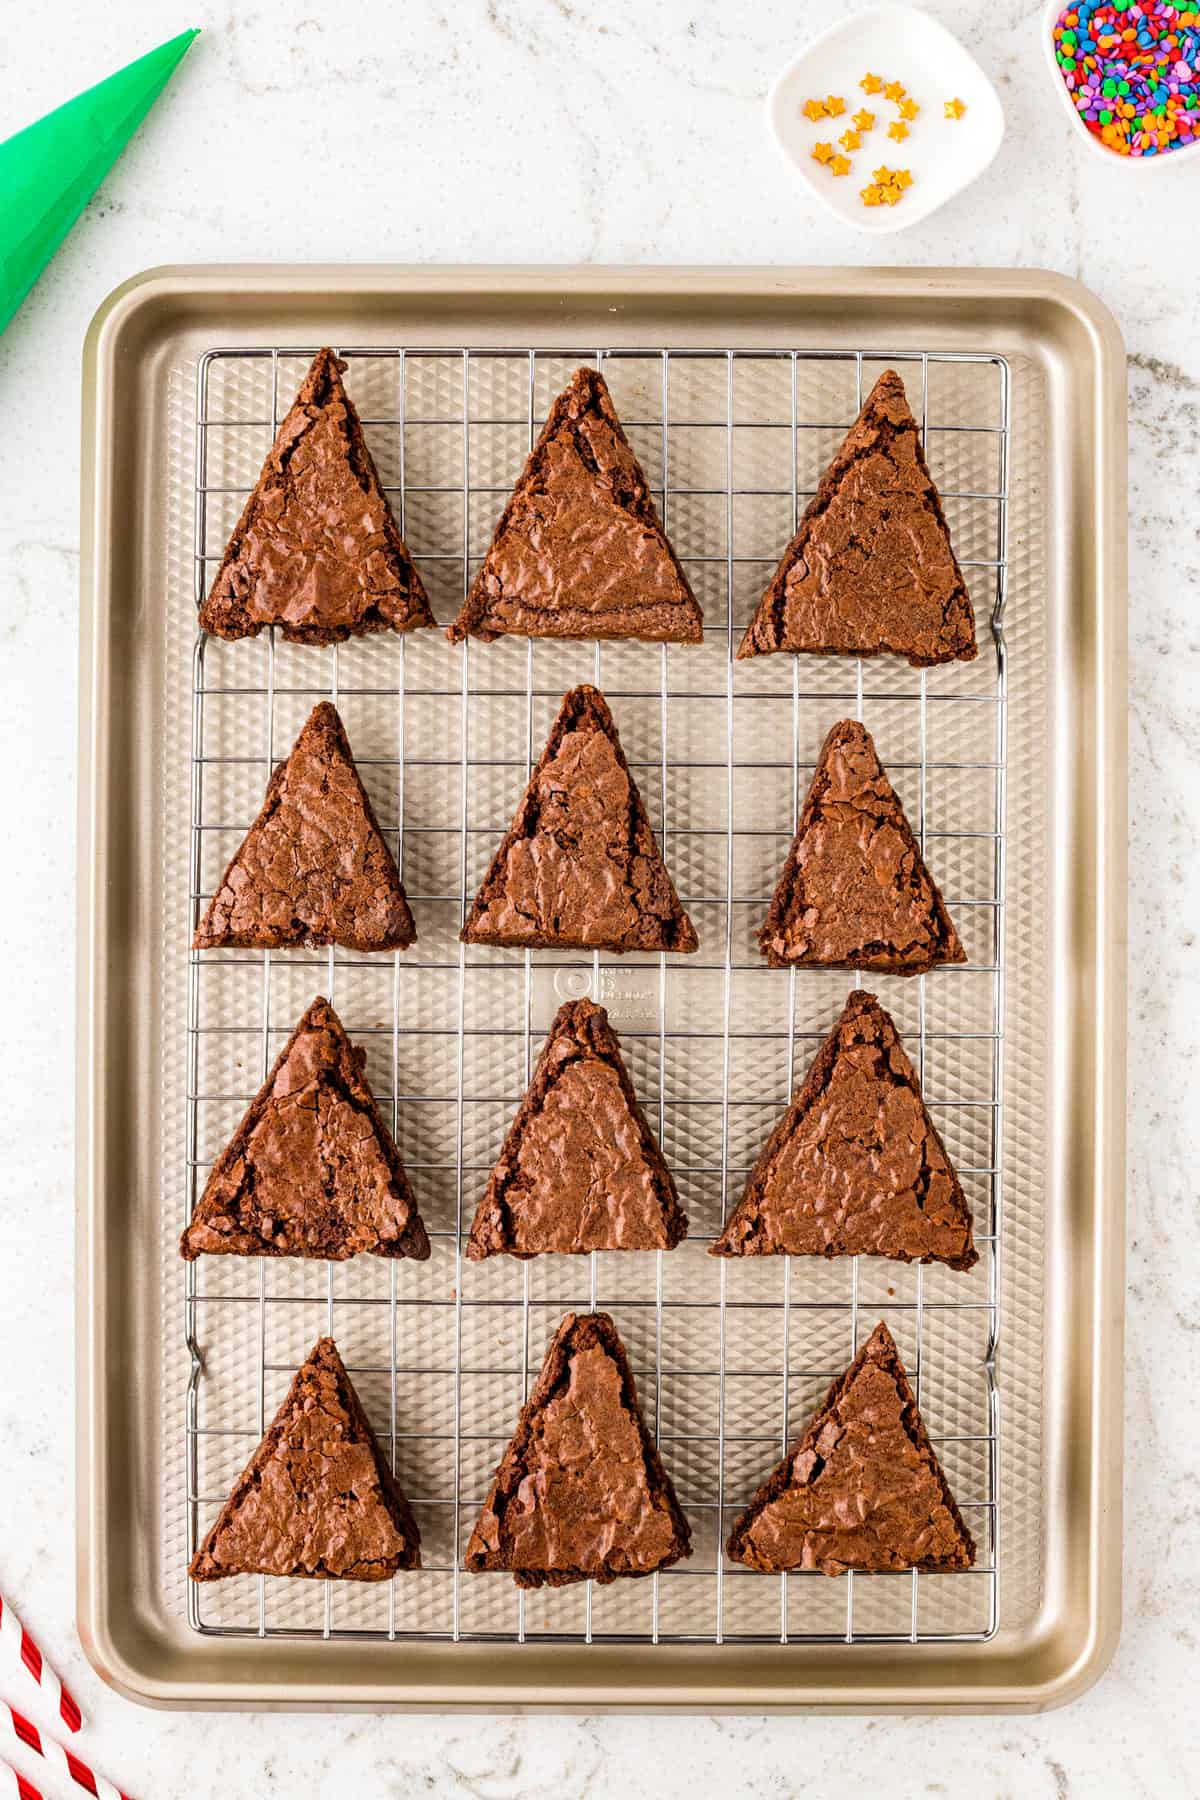 Cut the Brownie into 12 equal squares. Then cut Triangles out of Each Square, place the Extras in a bag to snack on.